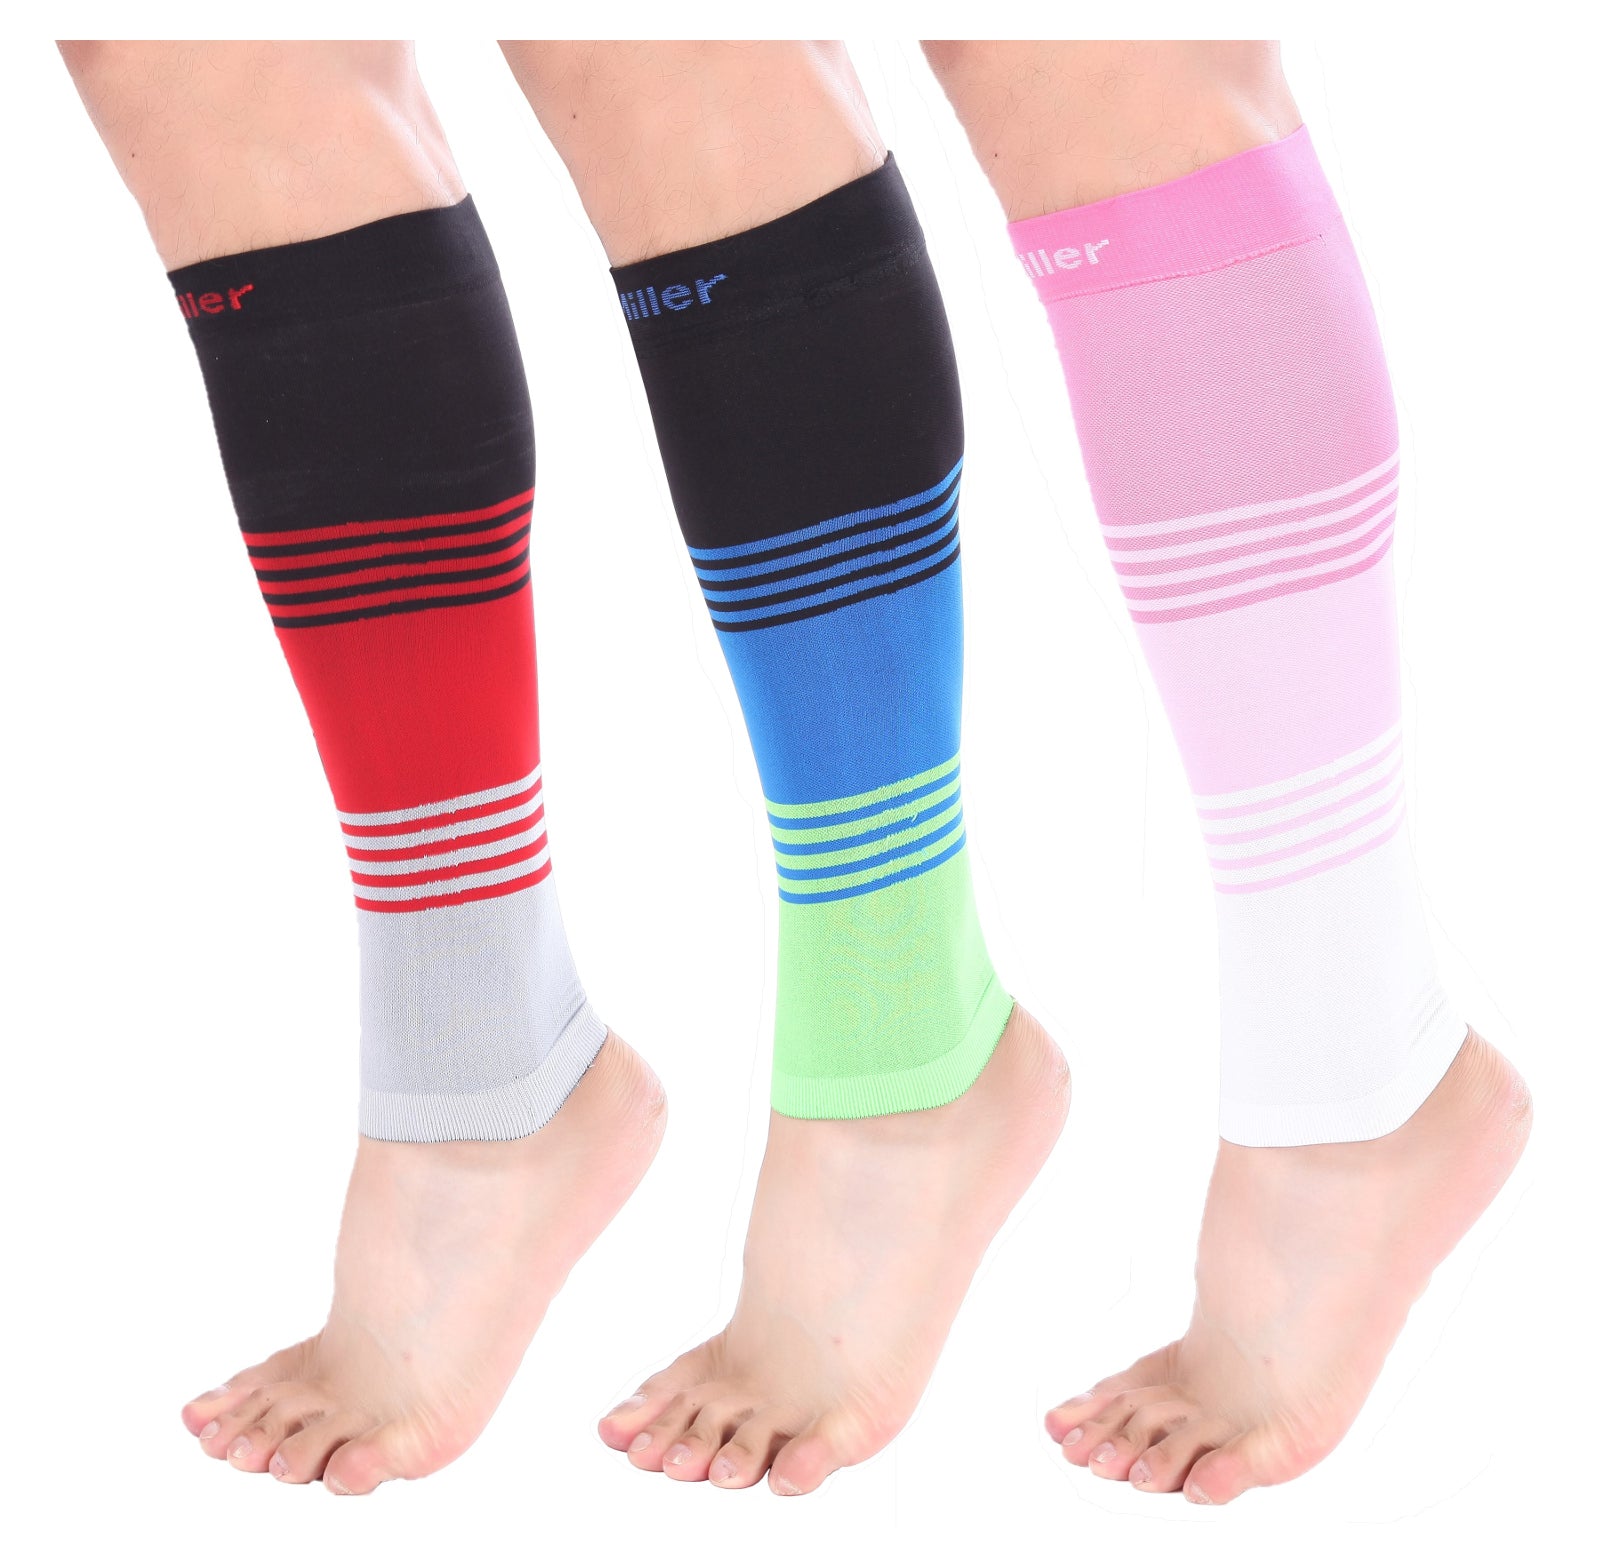 Shop for All Kinds of Calf Sleeves Online with Doc Miller